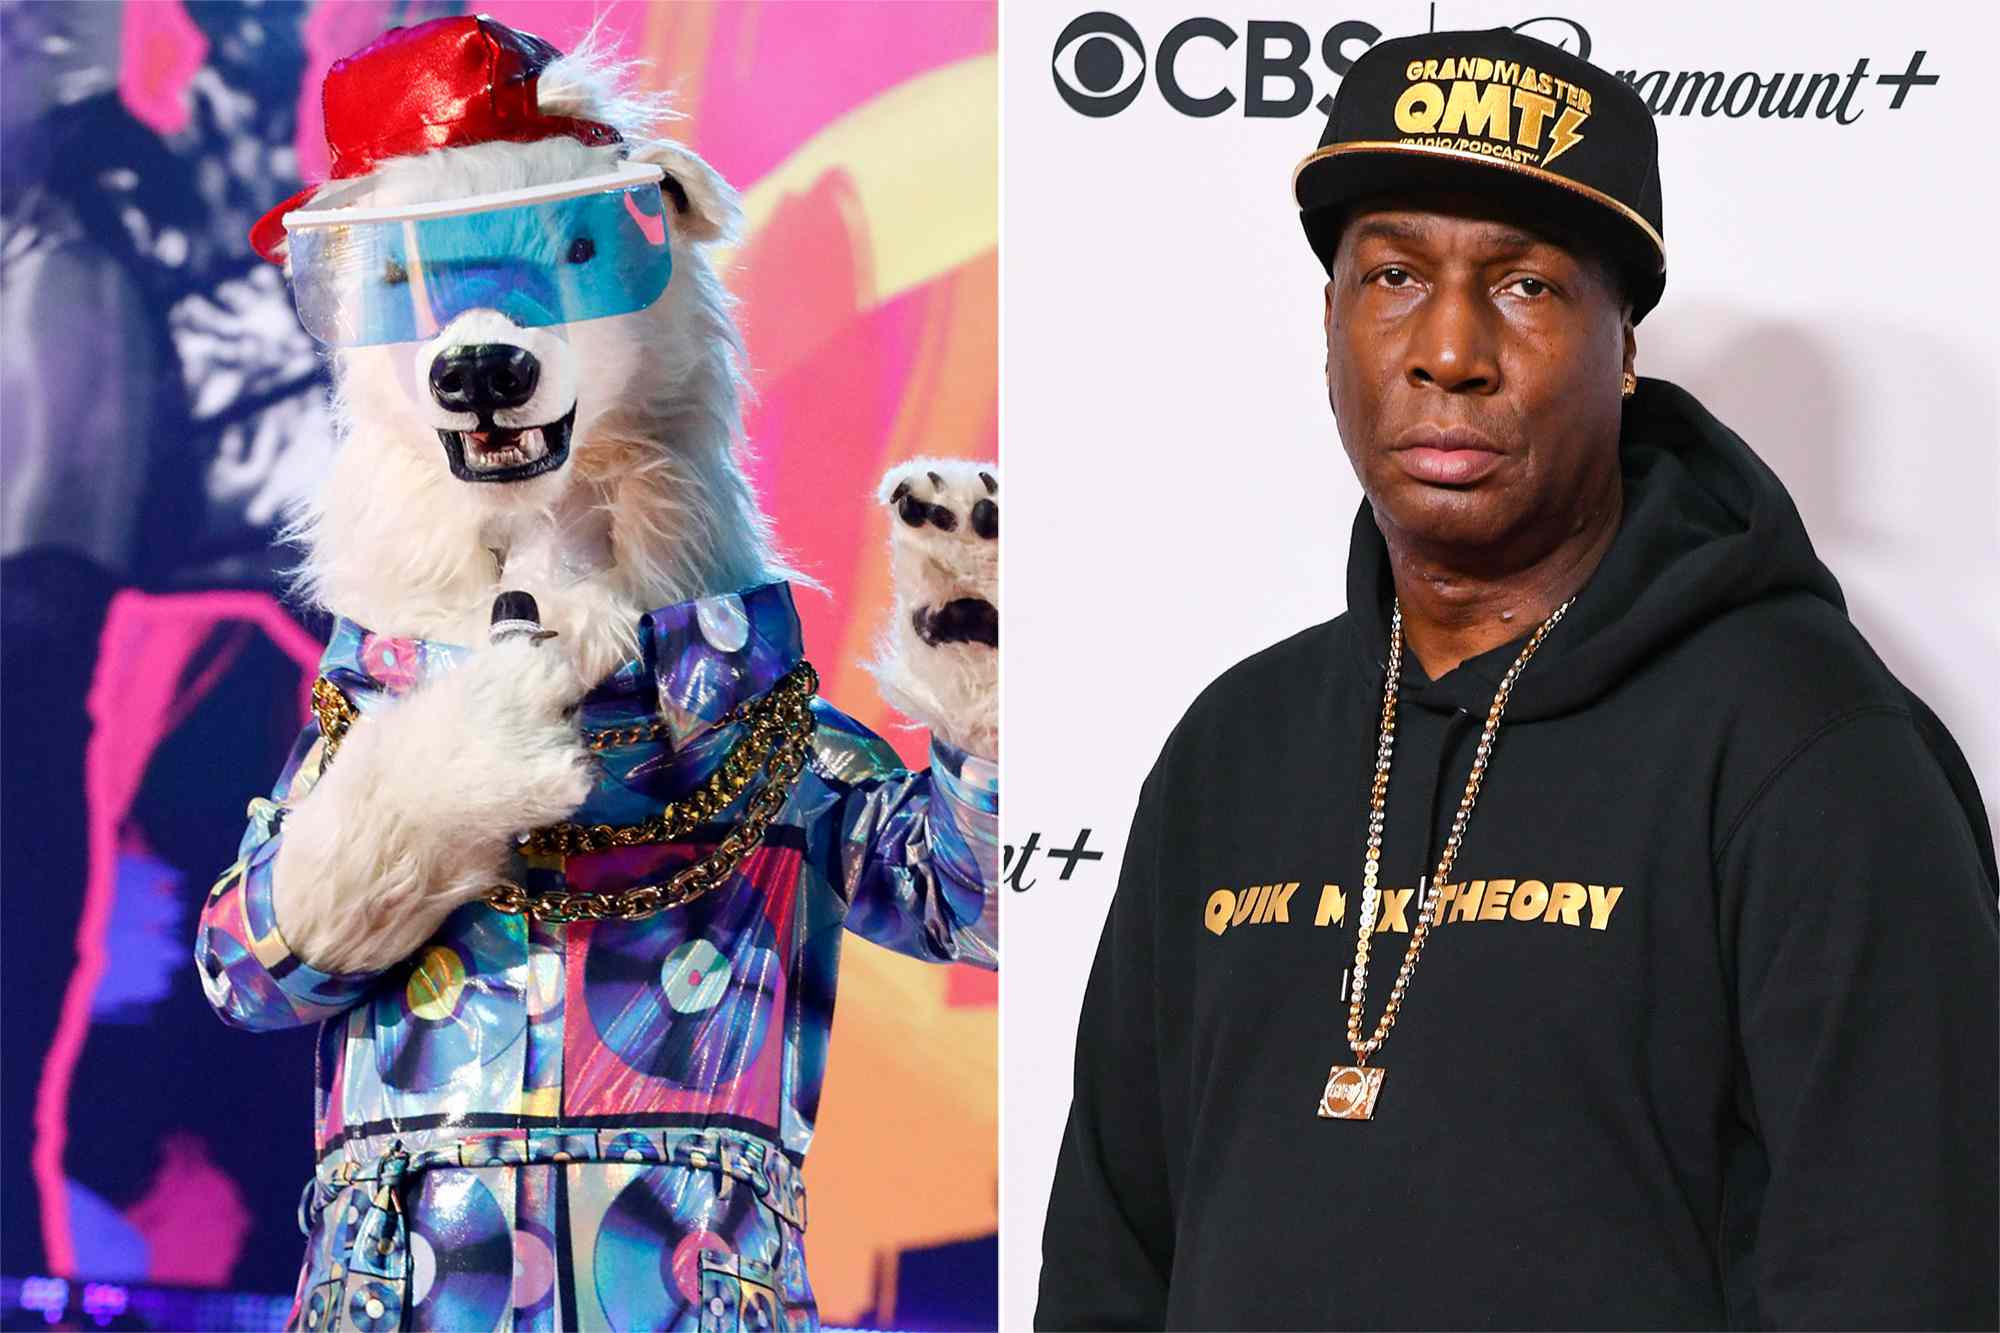 THE MASKED SINGER: Polar Bear in the “New York Night” episode of THE MASKED SINGER airing Wednesday, March 1 , Grandmaster Flash poses in the press room during the 65th GRAMMY Awards at Crypto.com Arena on February 05, 2023 in Los Angeles, California